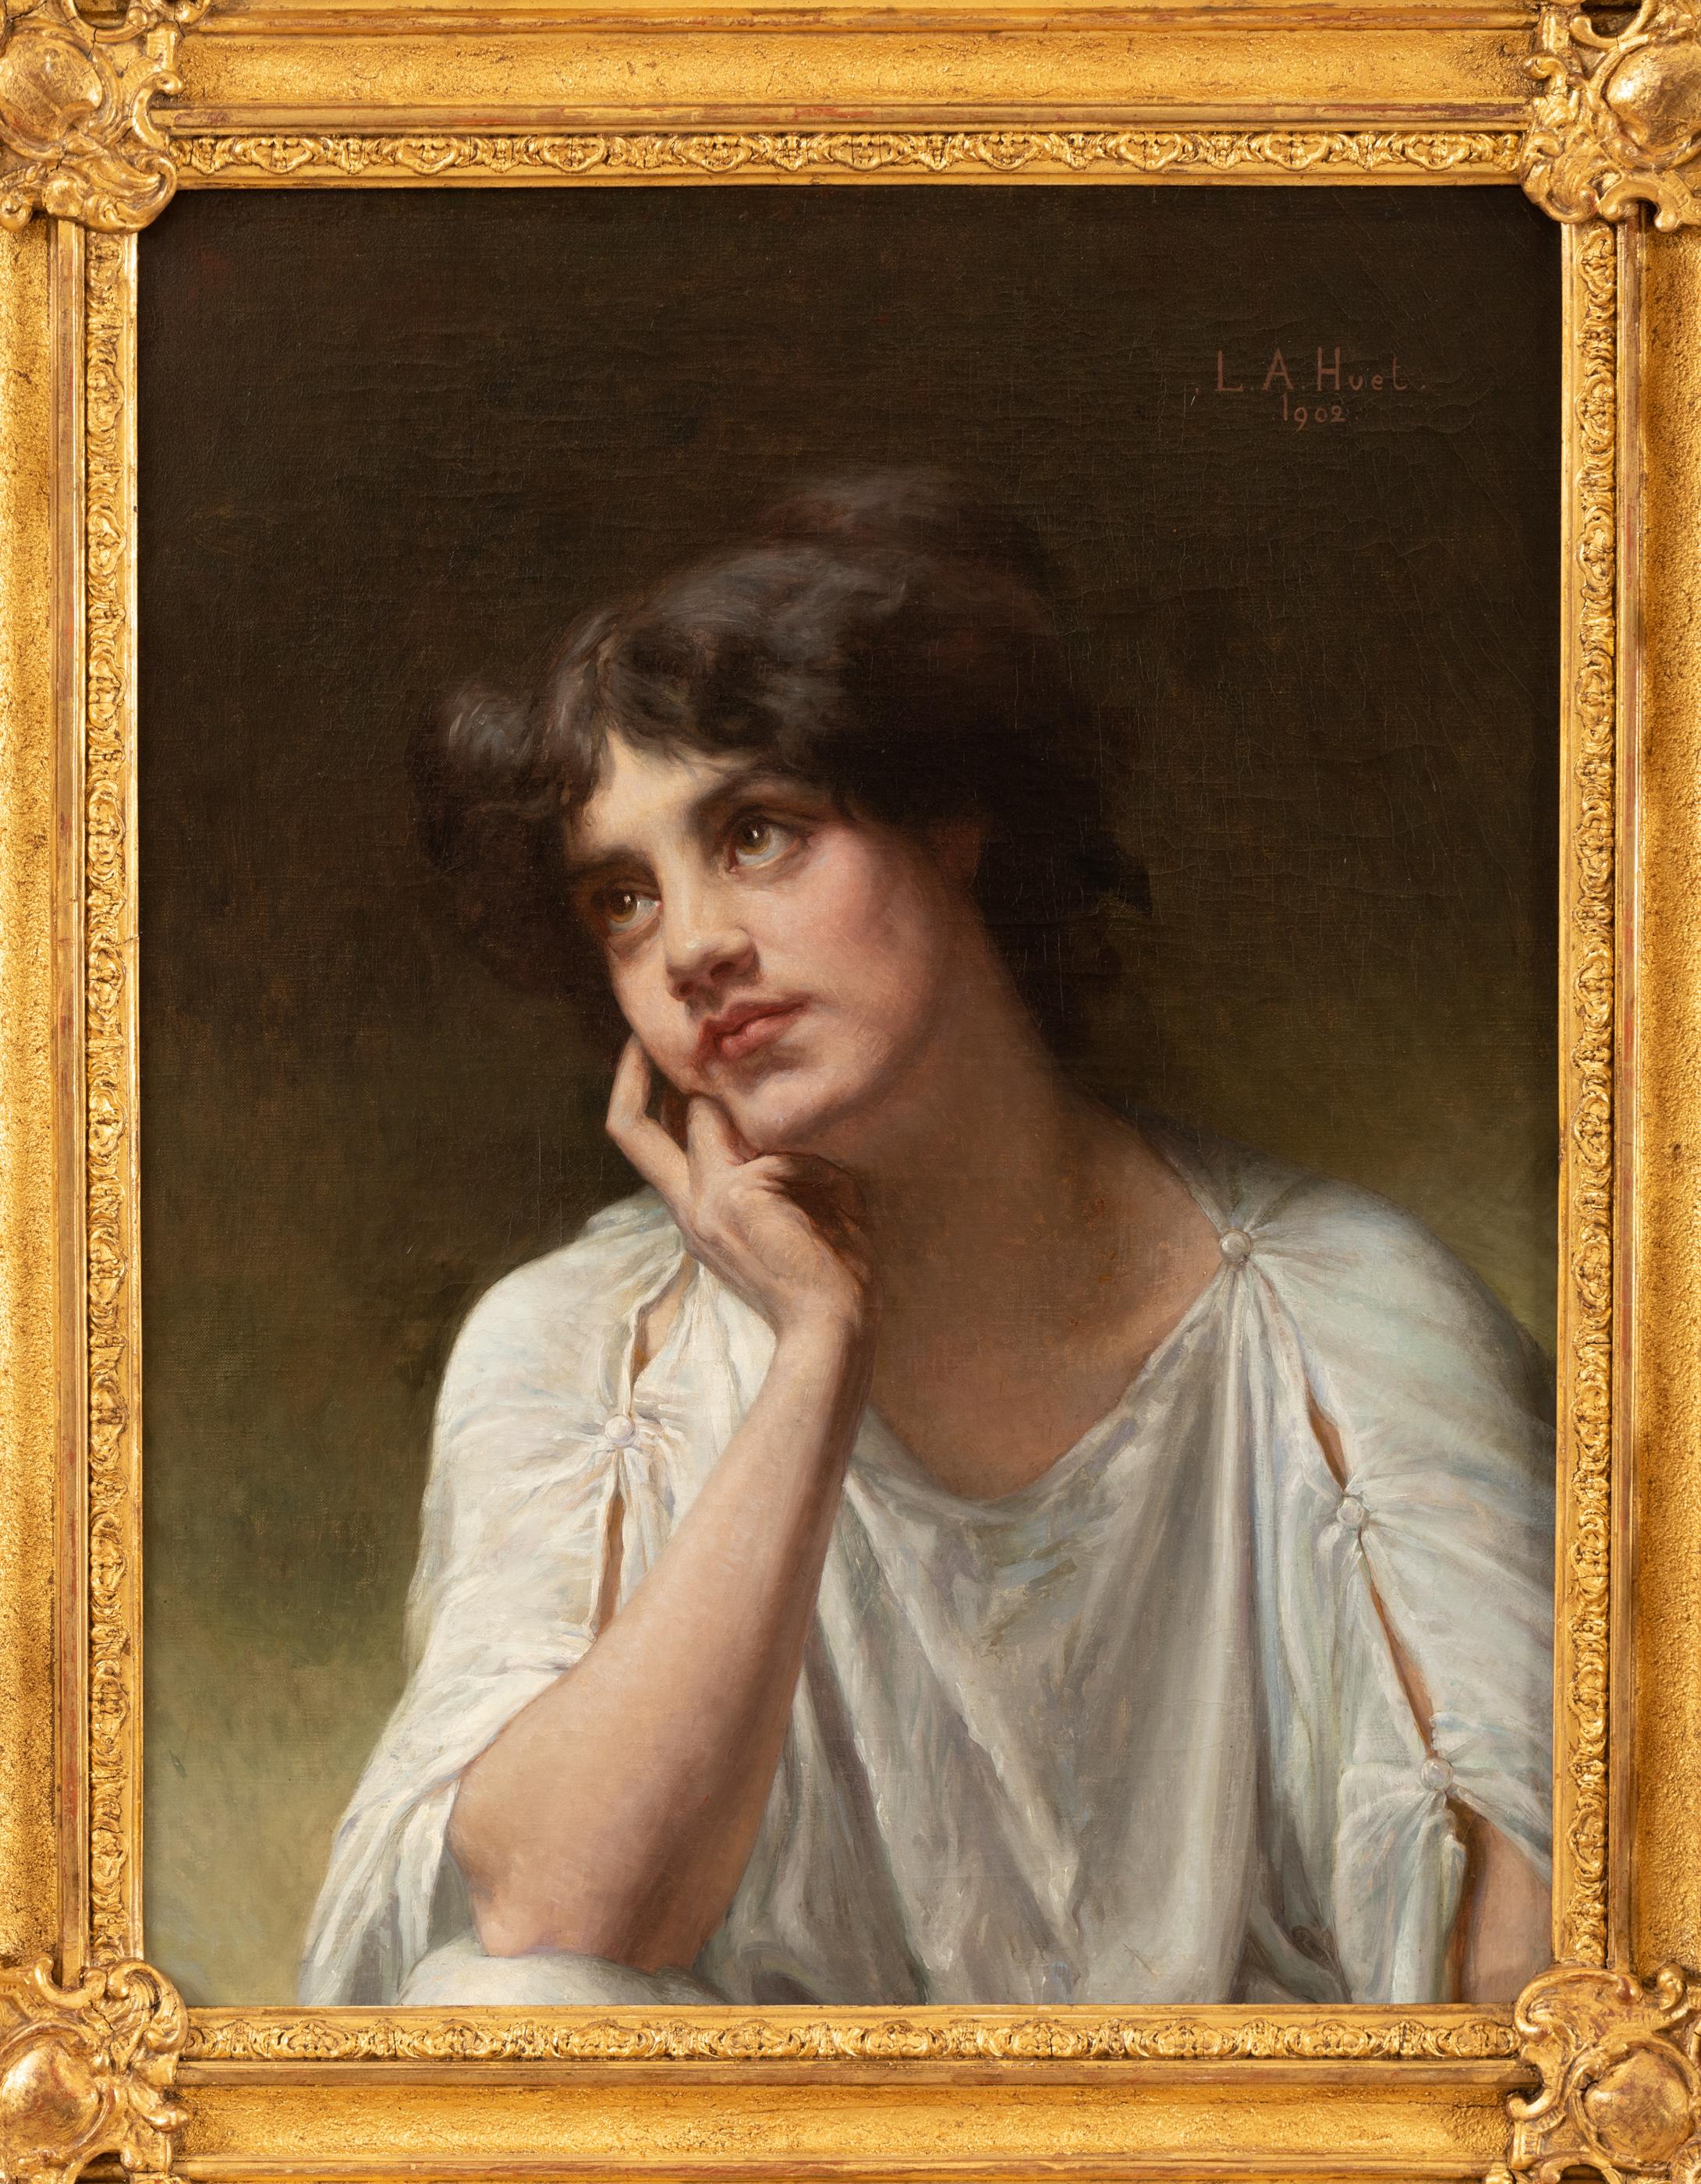 Louis Armand Huet - Portrait of a woman
The work is signed and dated 